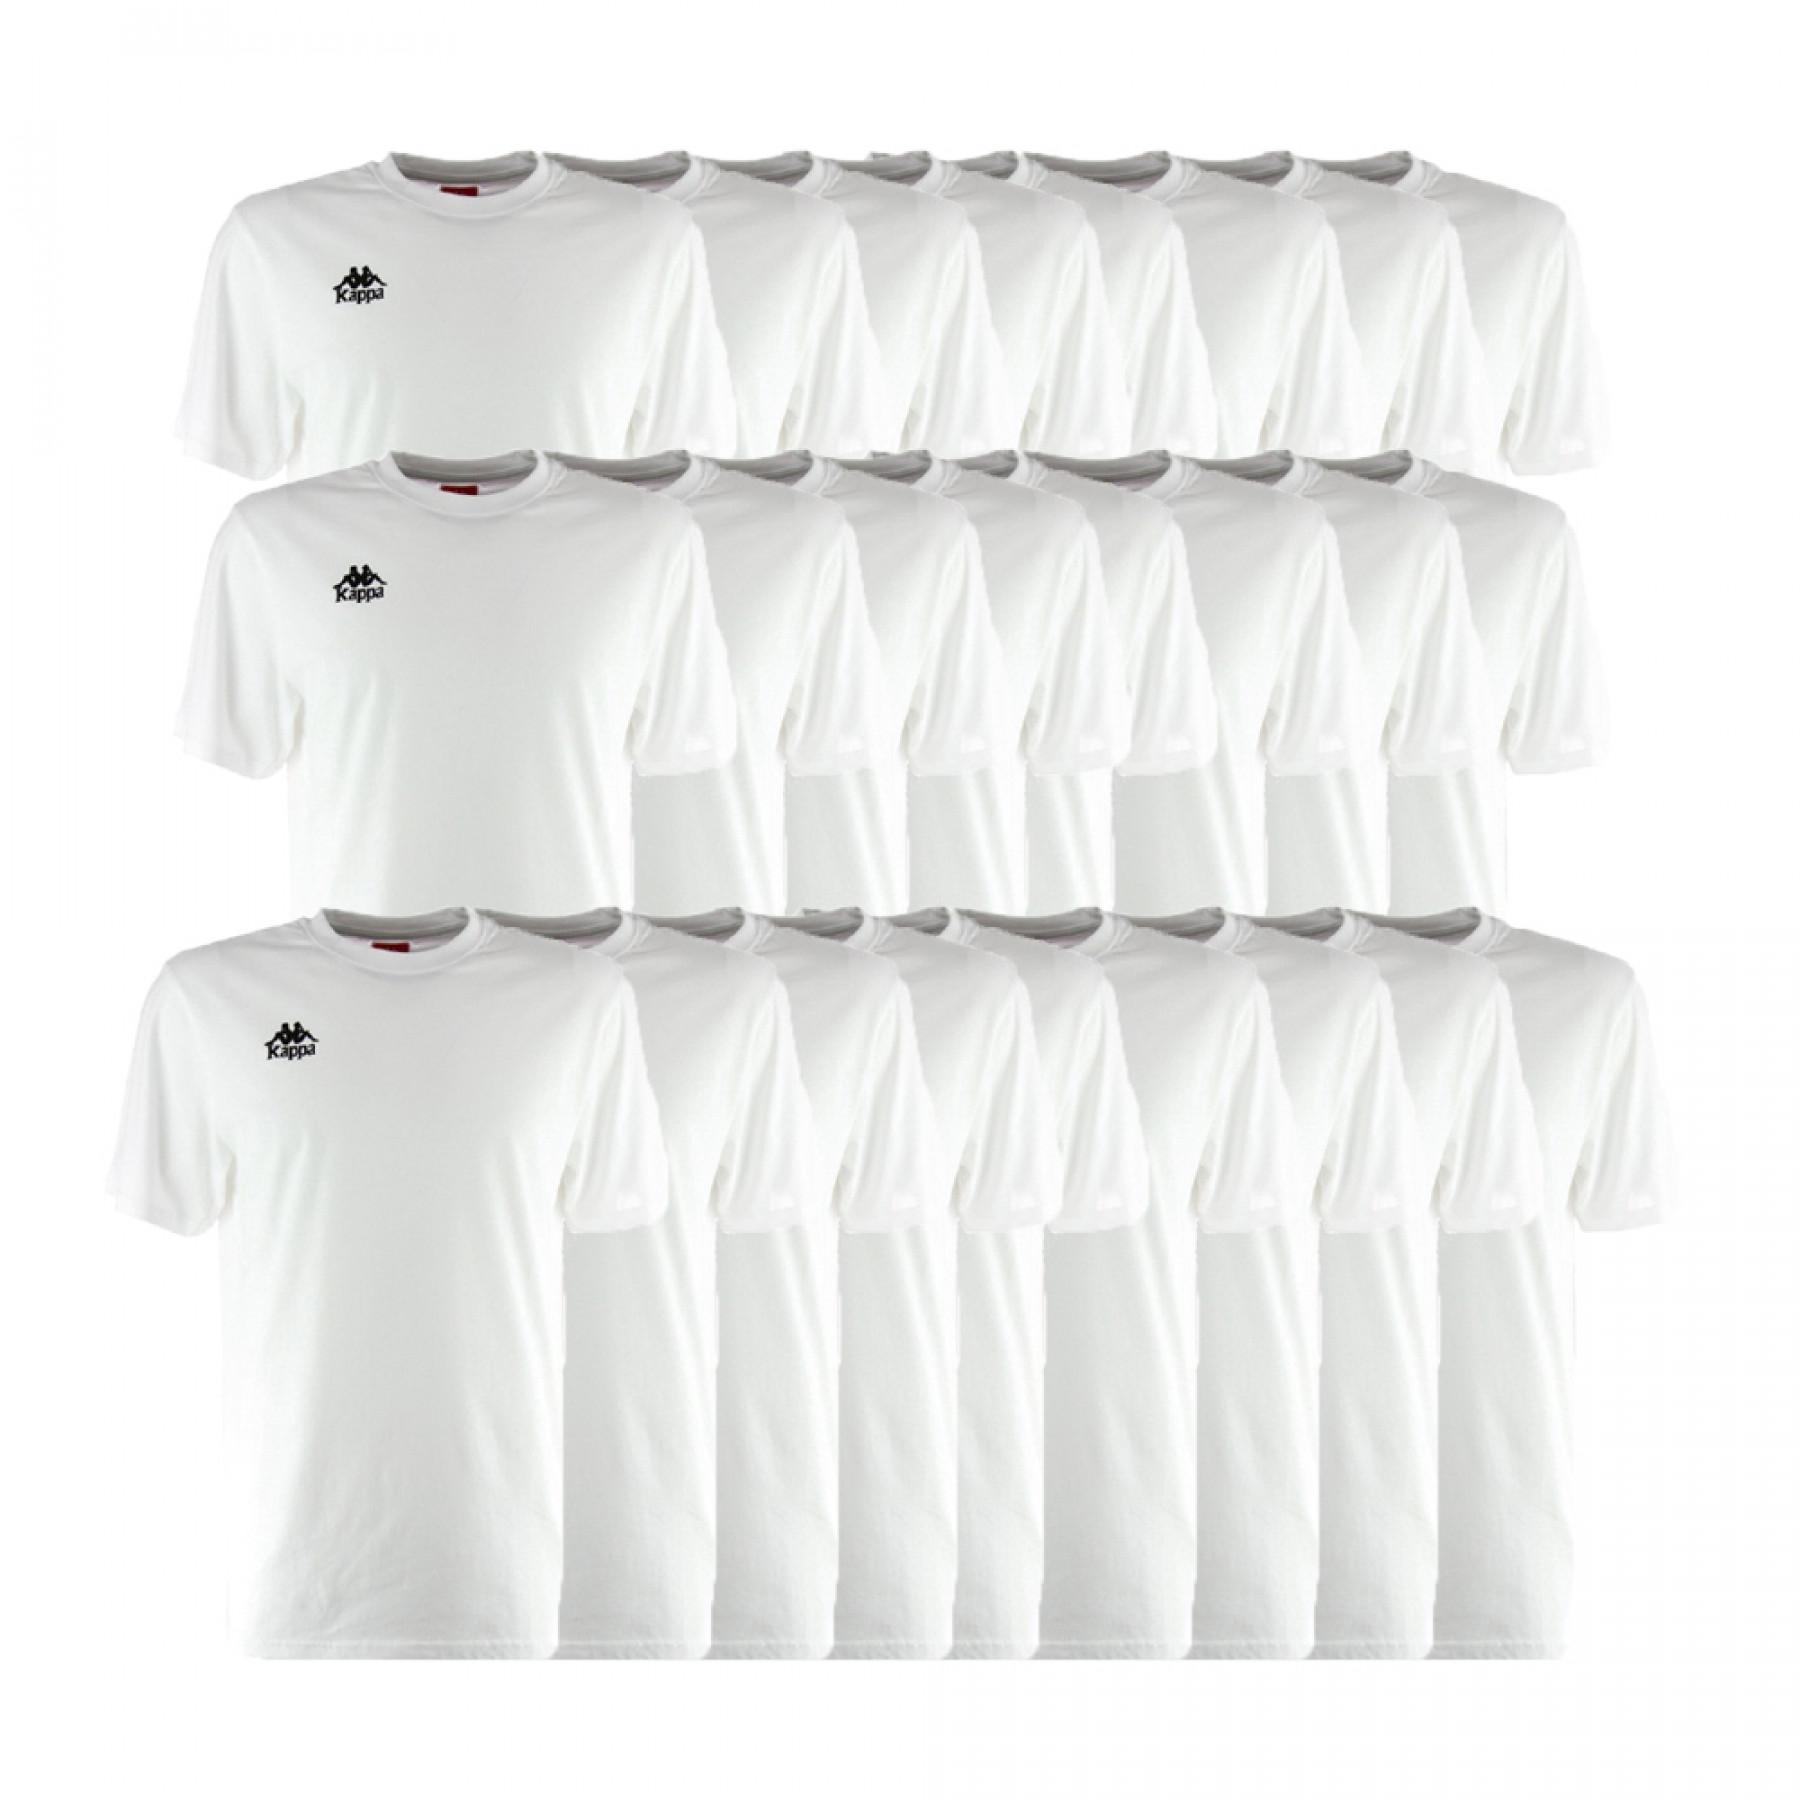 Pack of 25 t-shirts Kappa Picelo